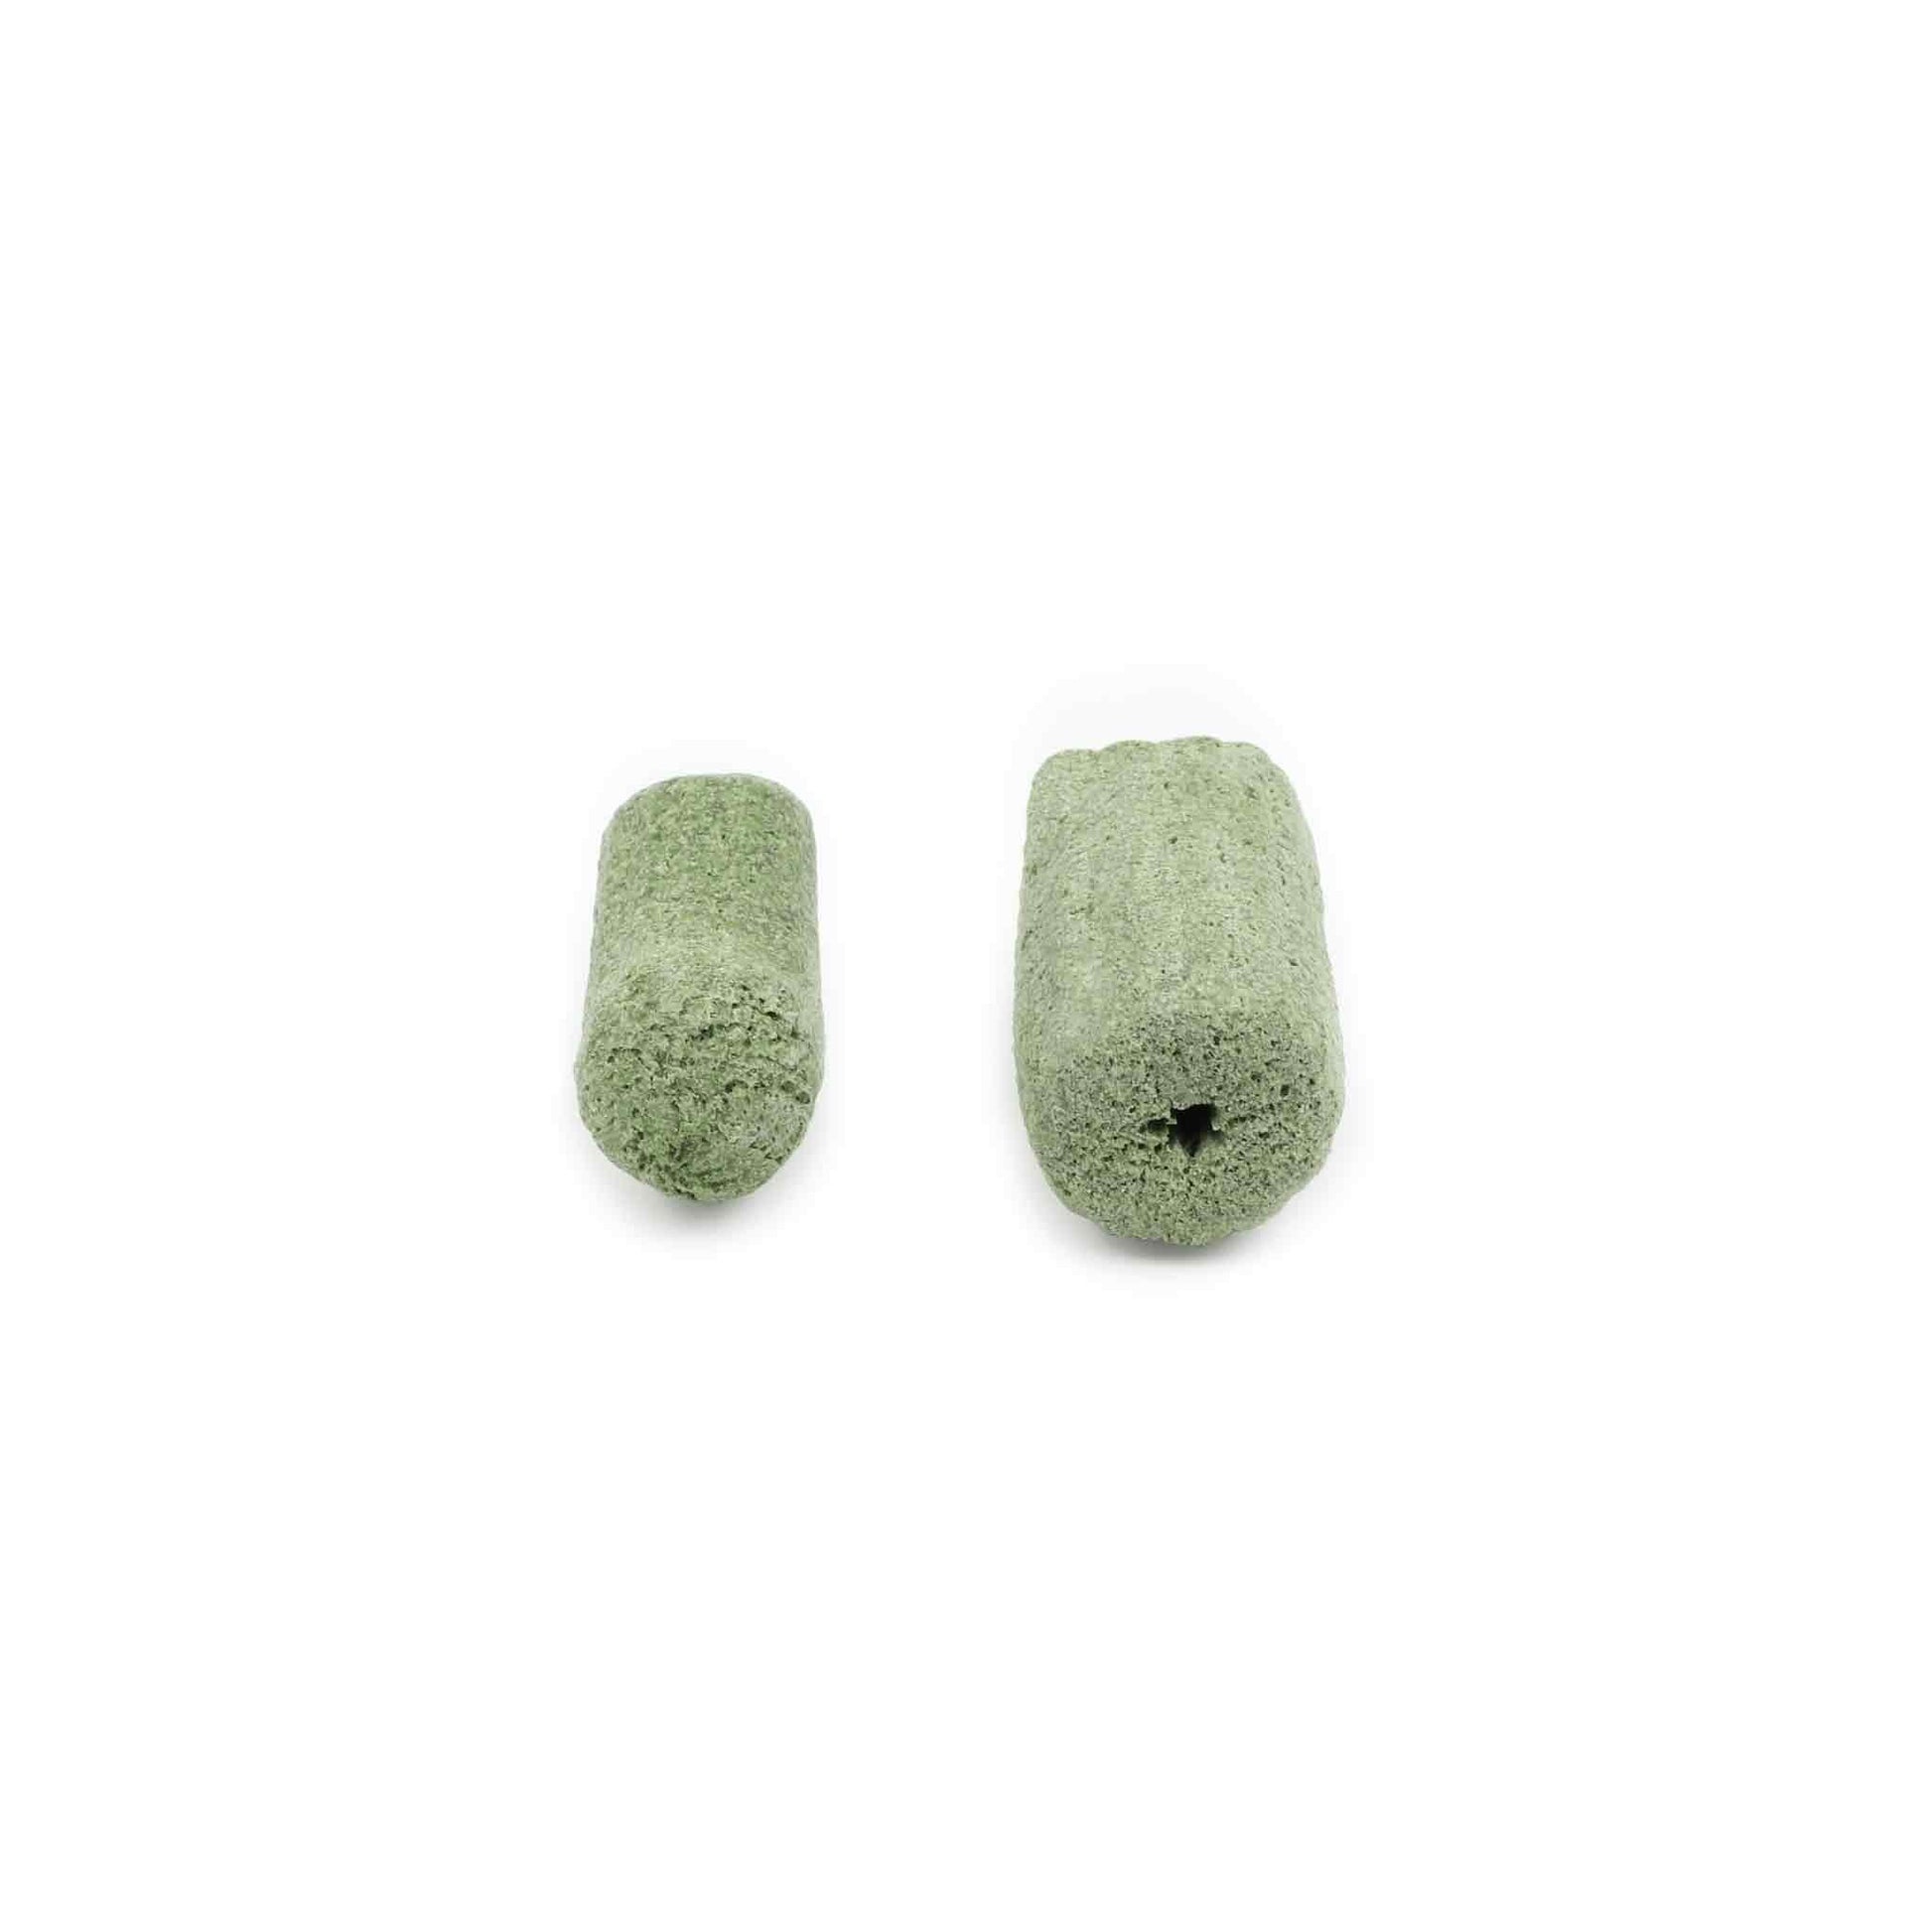 Small and Large Dental Chew for dogs